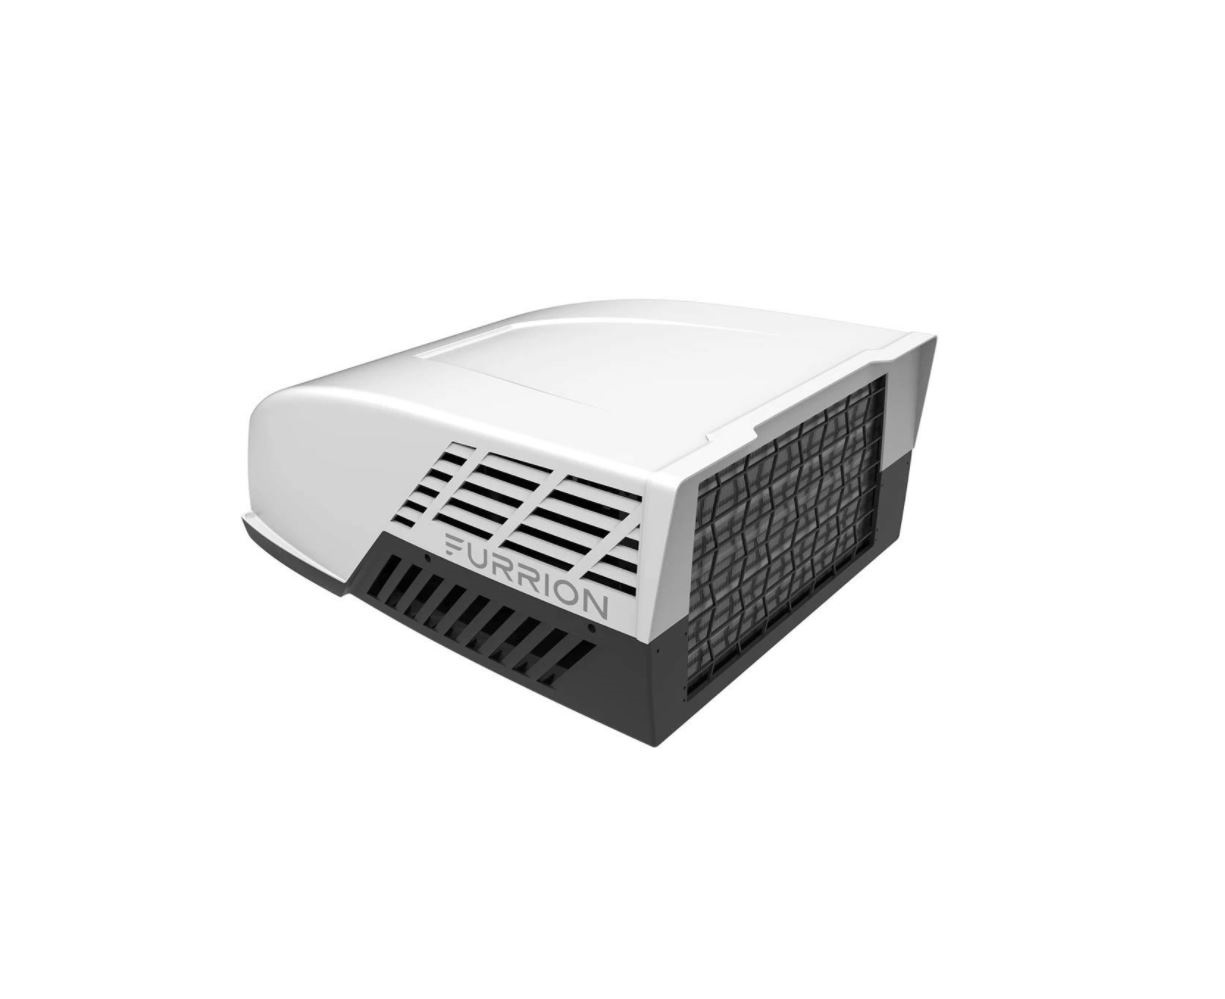 14.5K Rooftop Unit for Furrion Chill Air Conditioner System User Guide